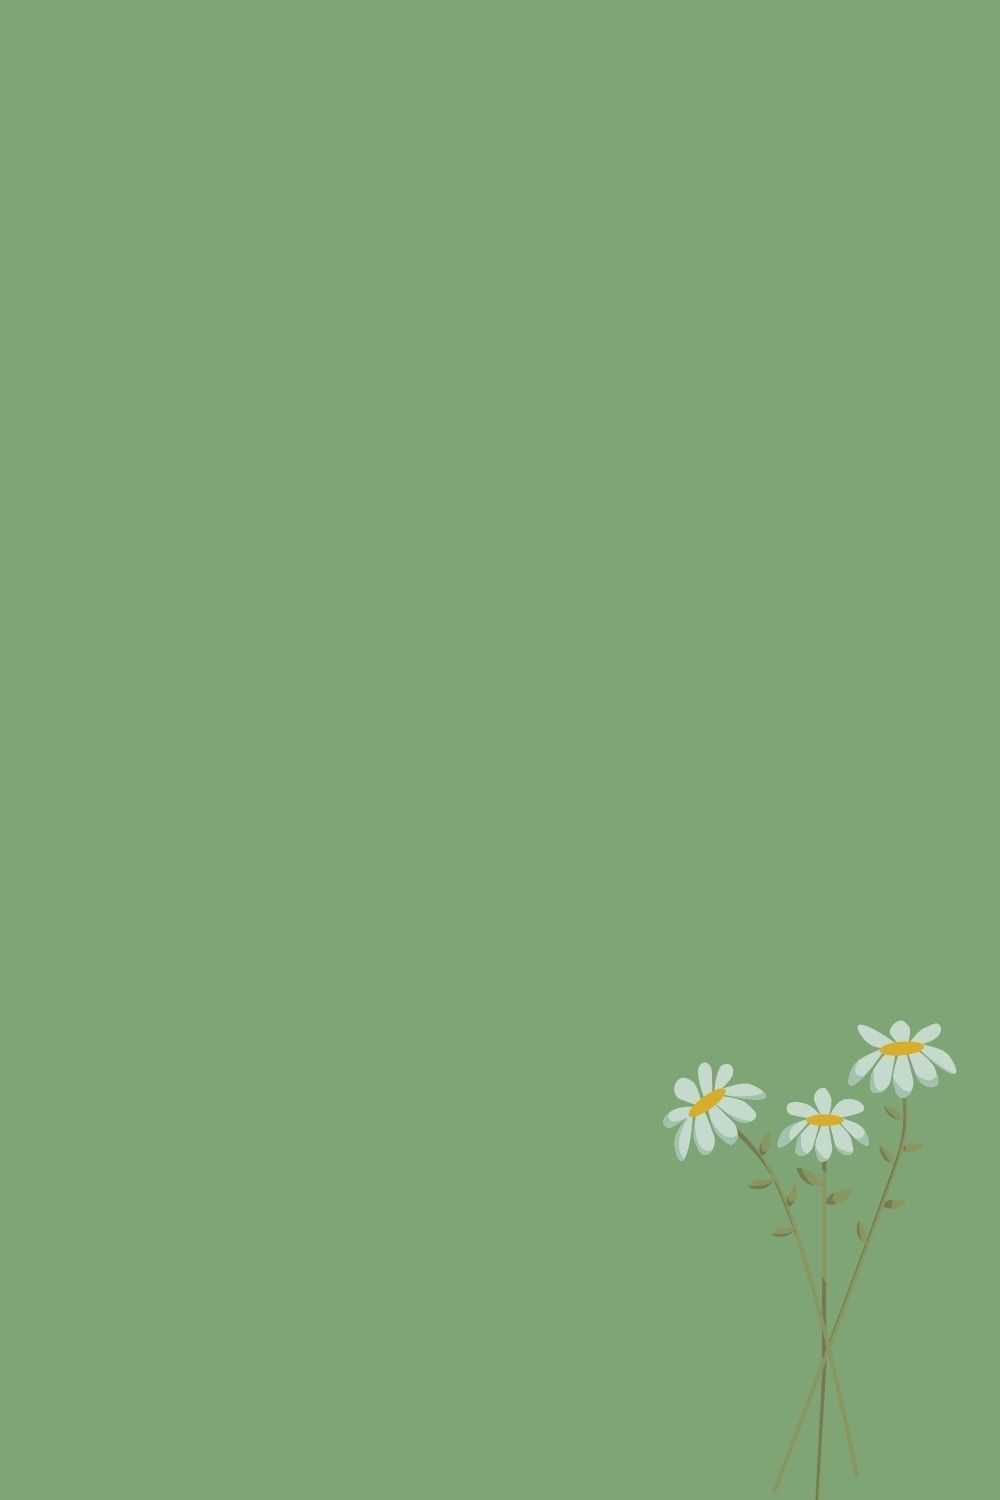 Sage Green Wallpapers and Backgrounds  WallpaperCG